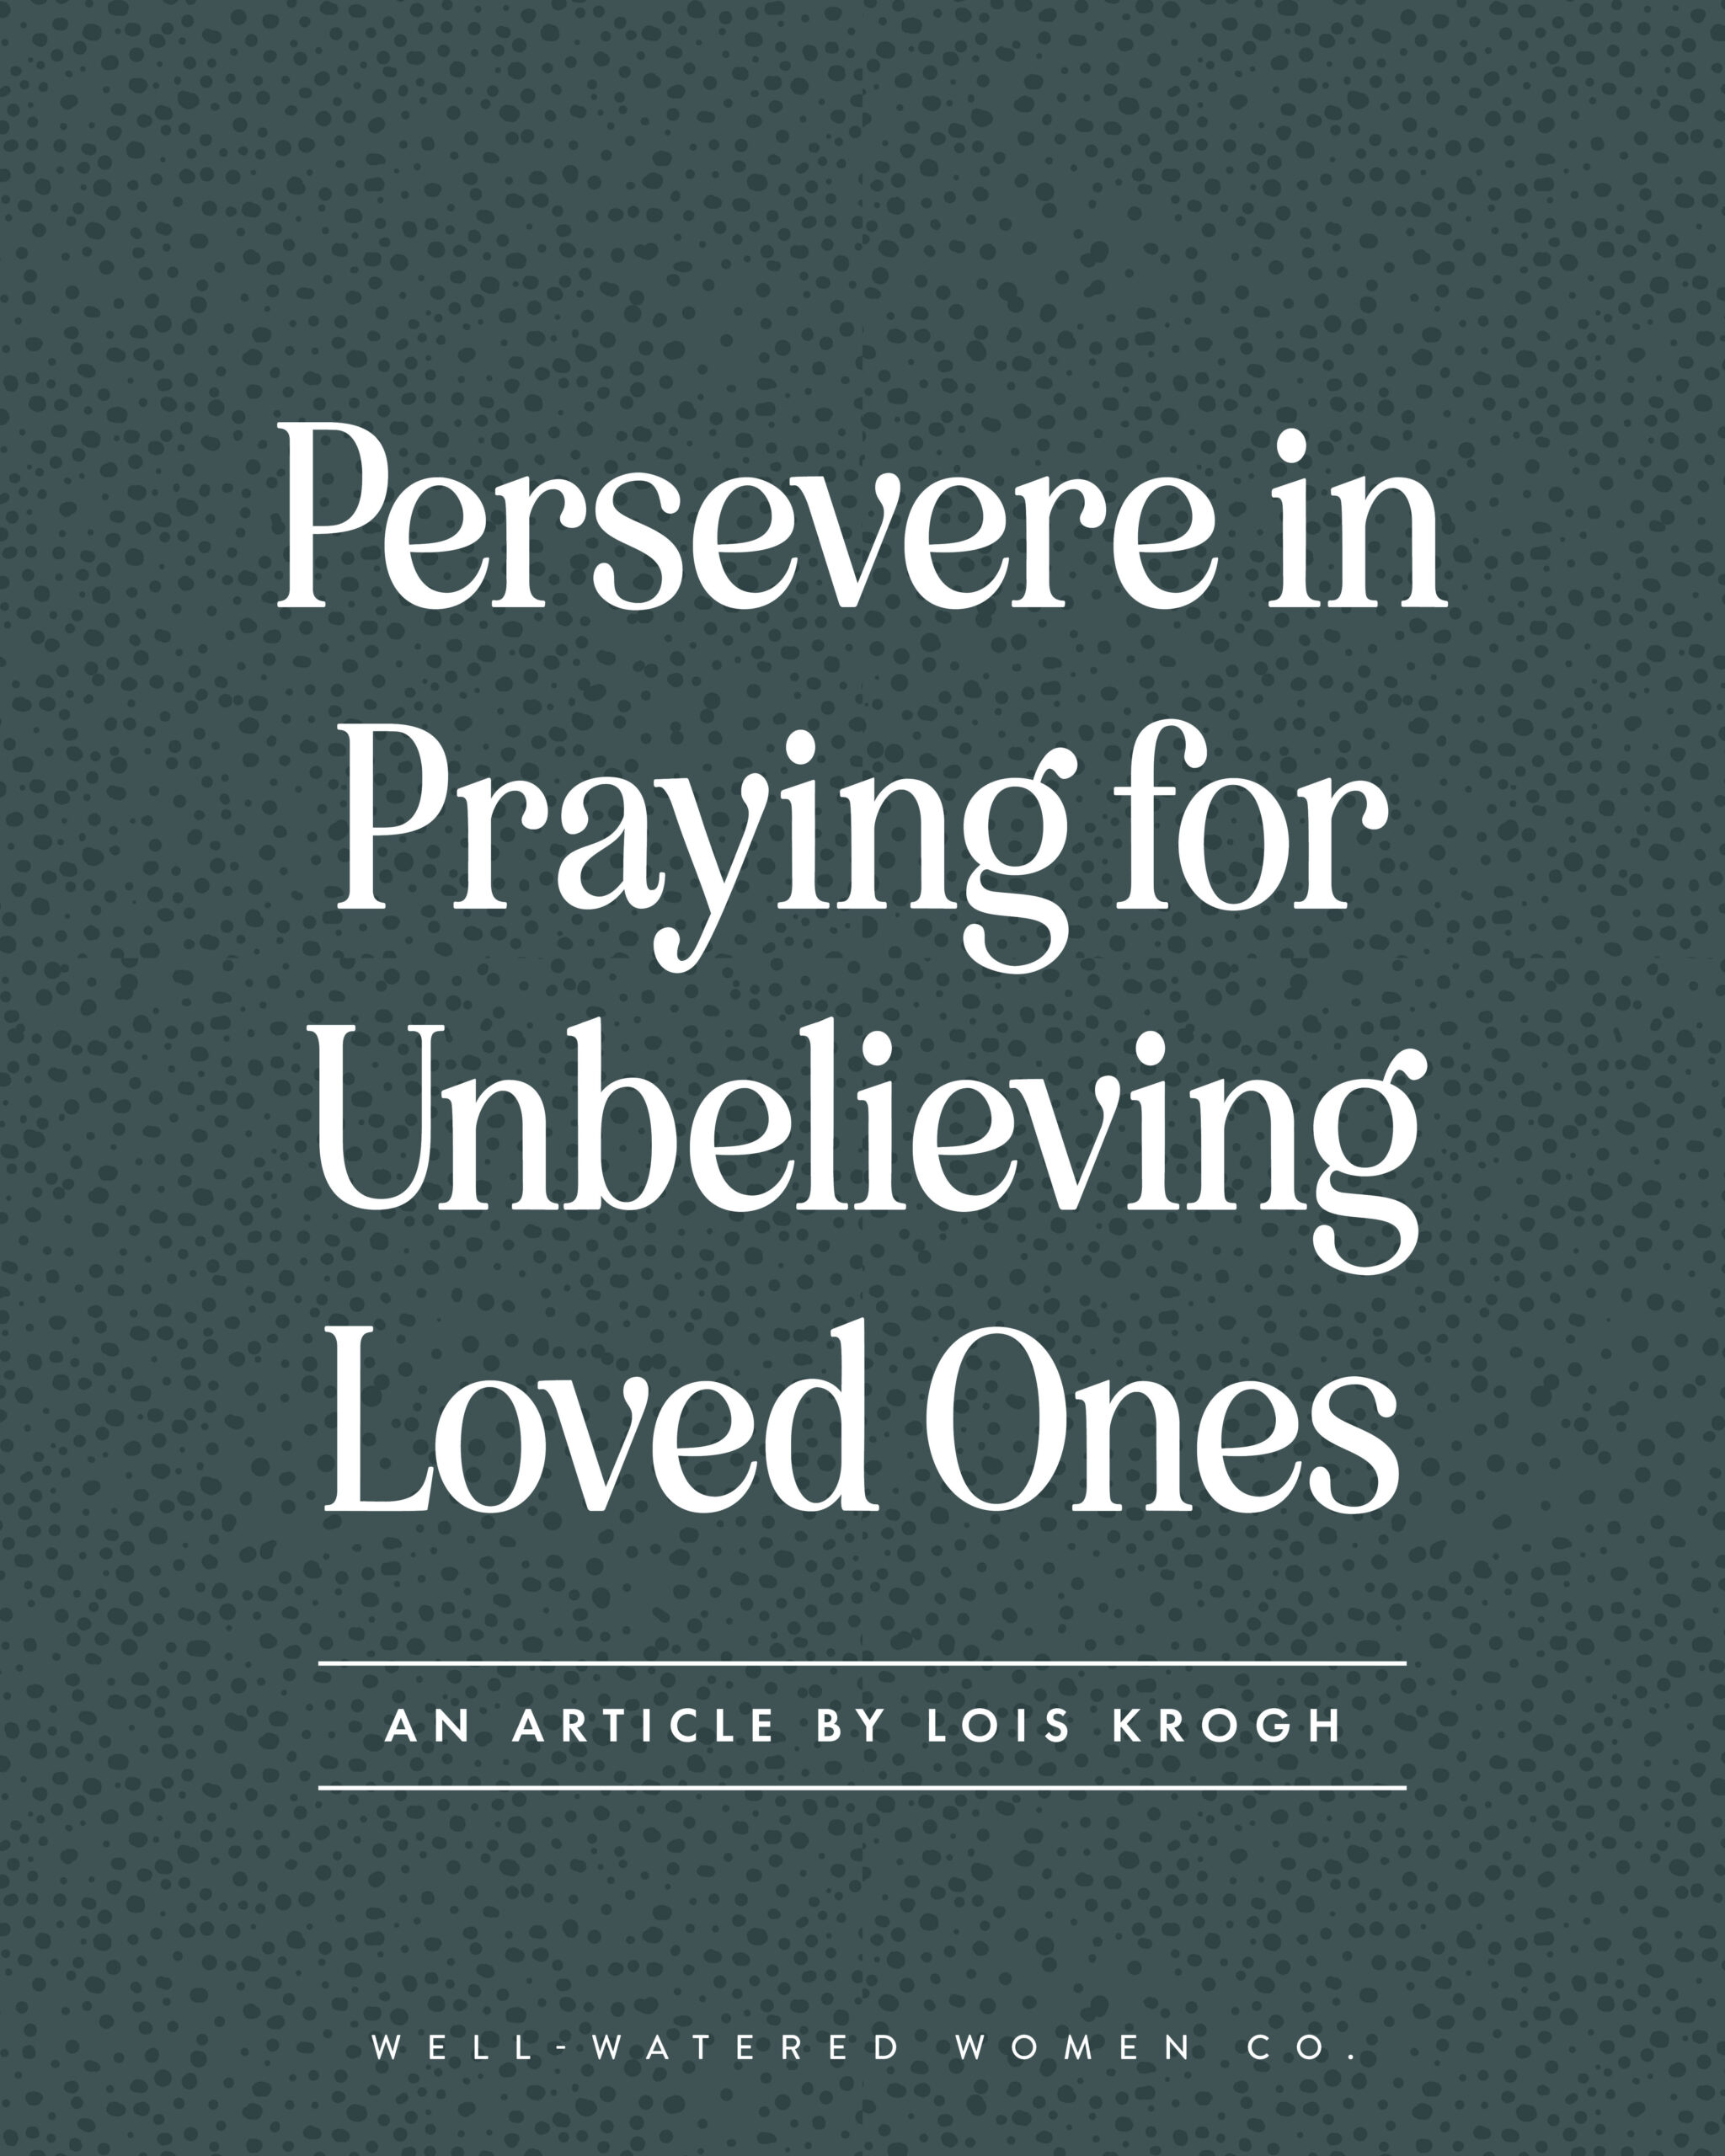 Persevere in Praying for Unbelieving Loved Ones - an article from Well-Watered Women